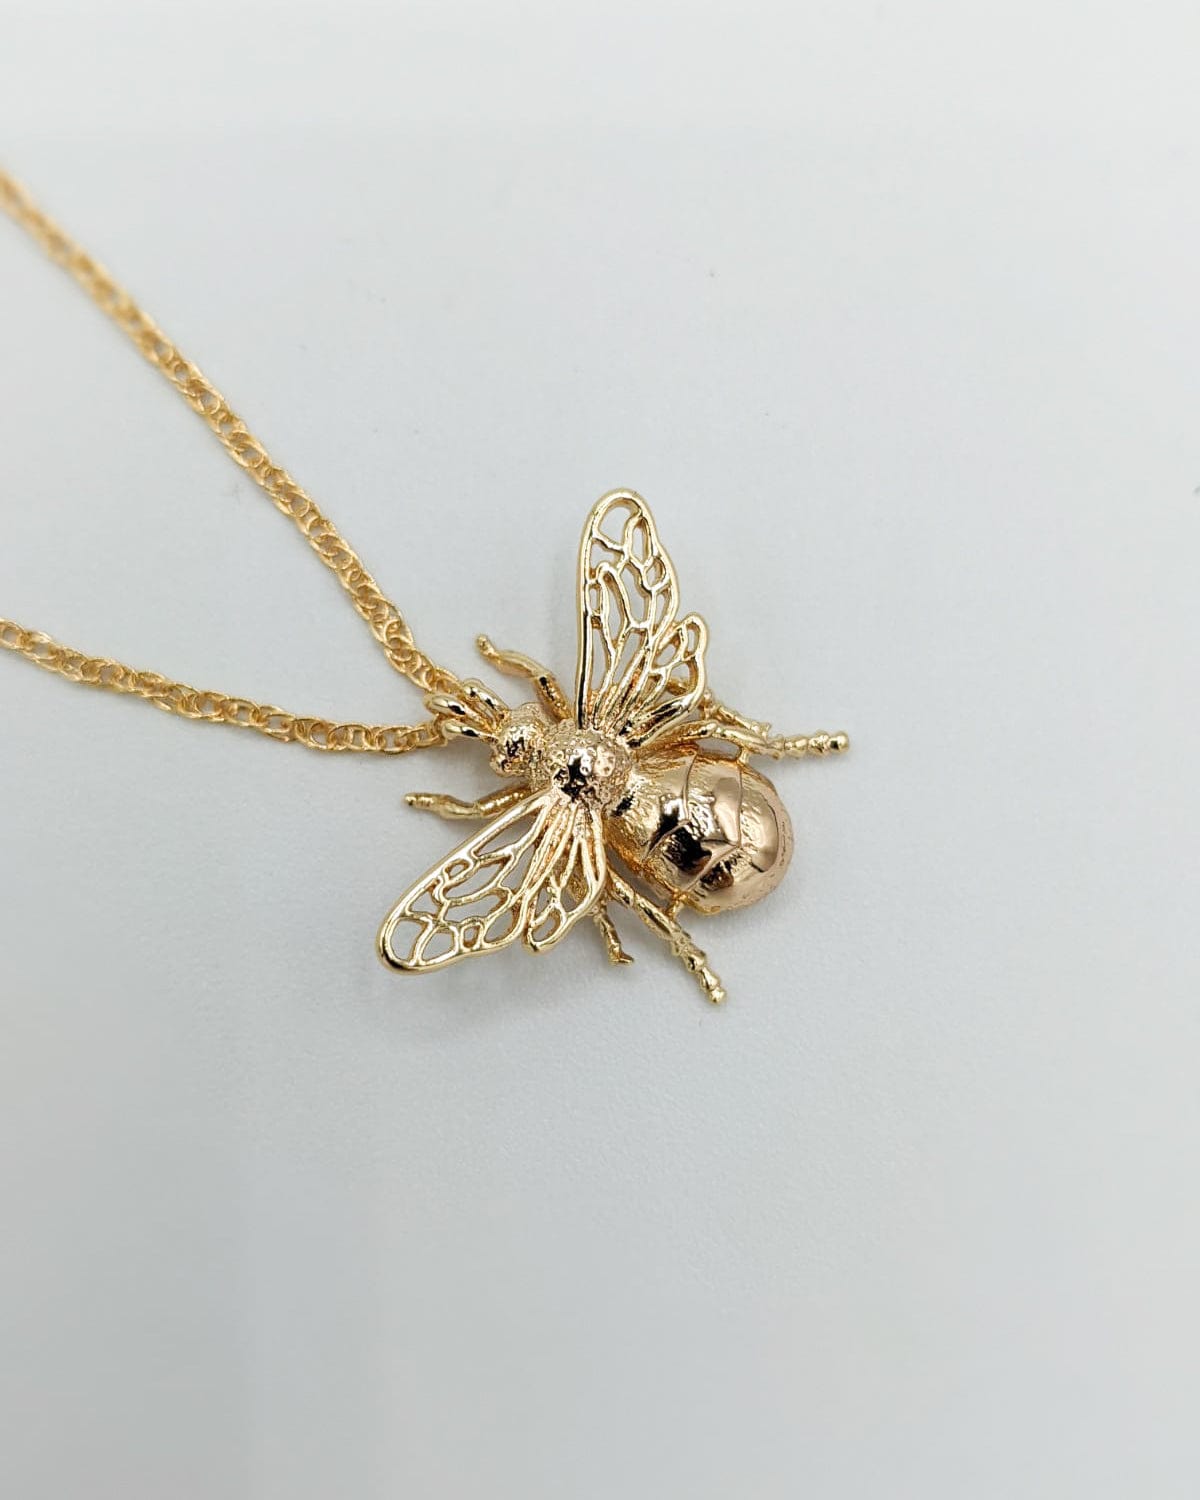 Gold plated bumble bee necklace. 14k gold filled chain with pendant. 